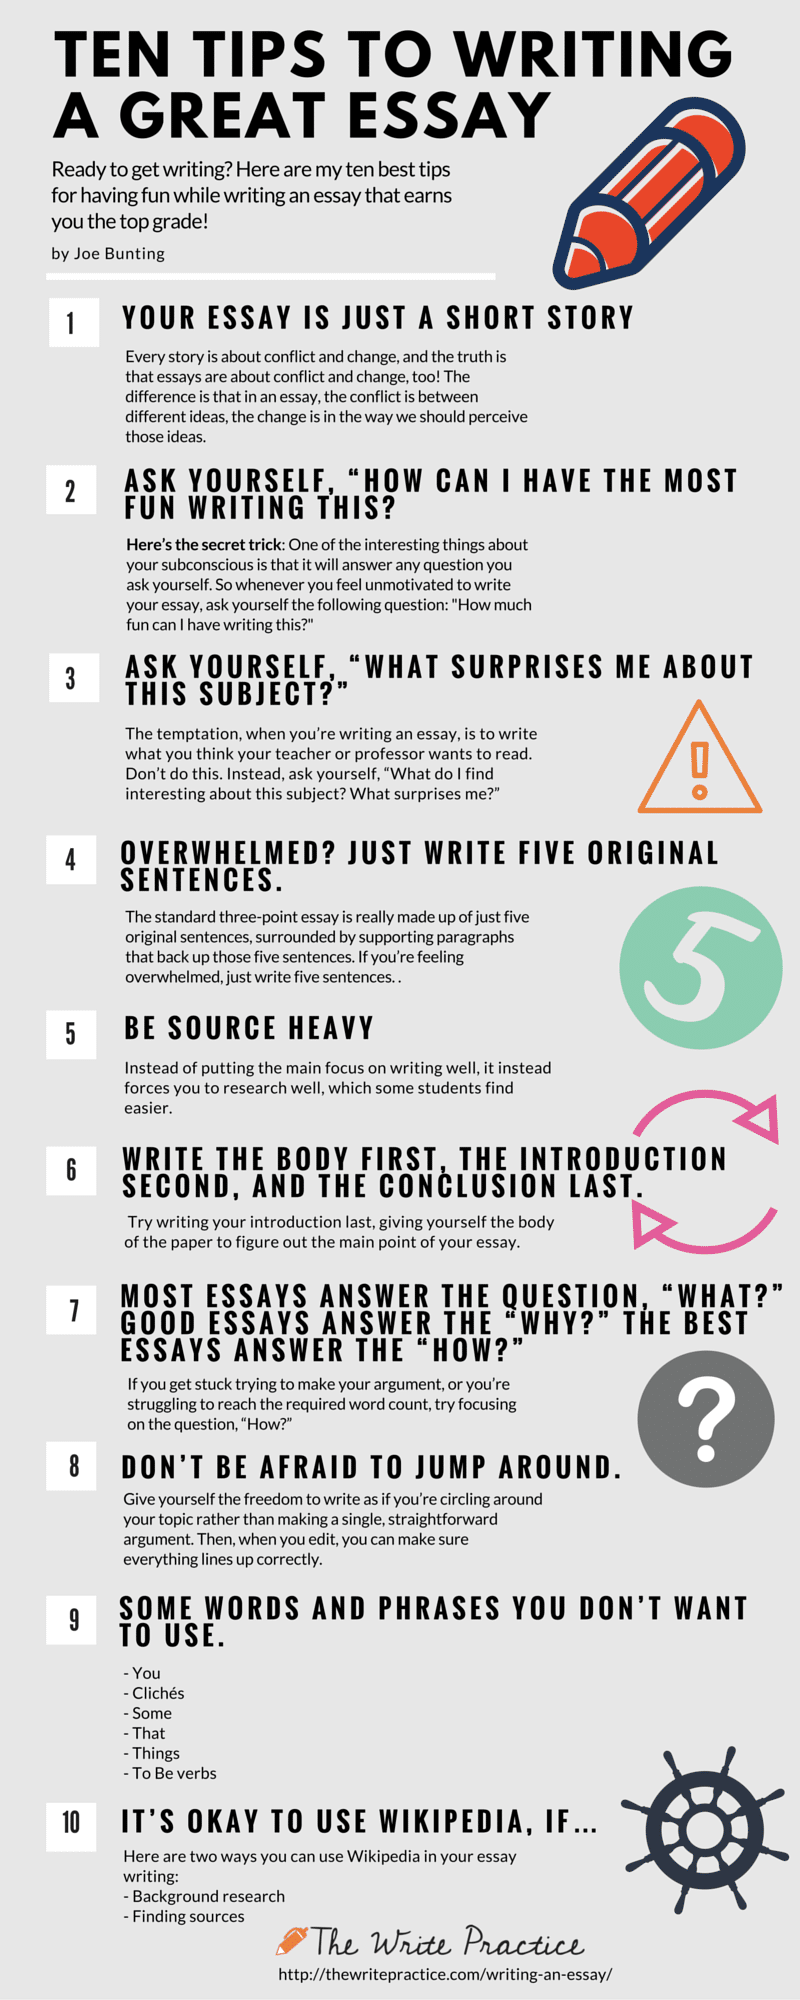 10 Ways to Make Your essay Easier